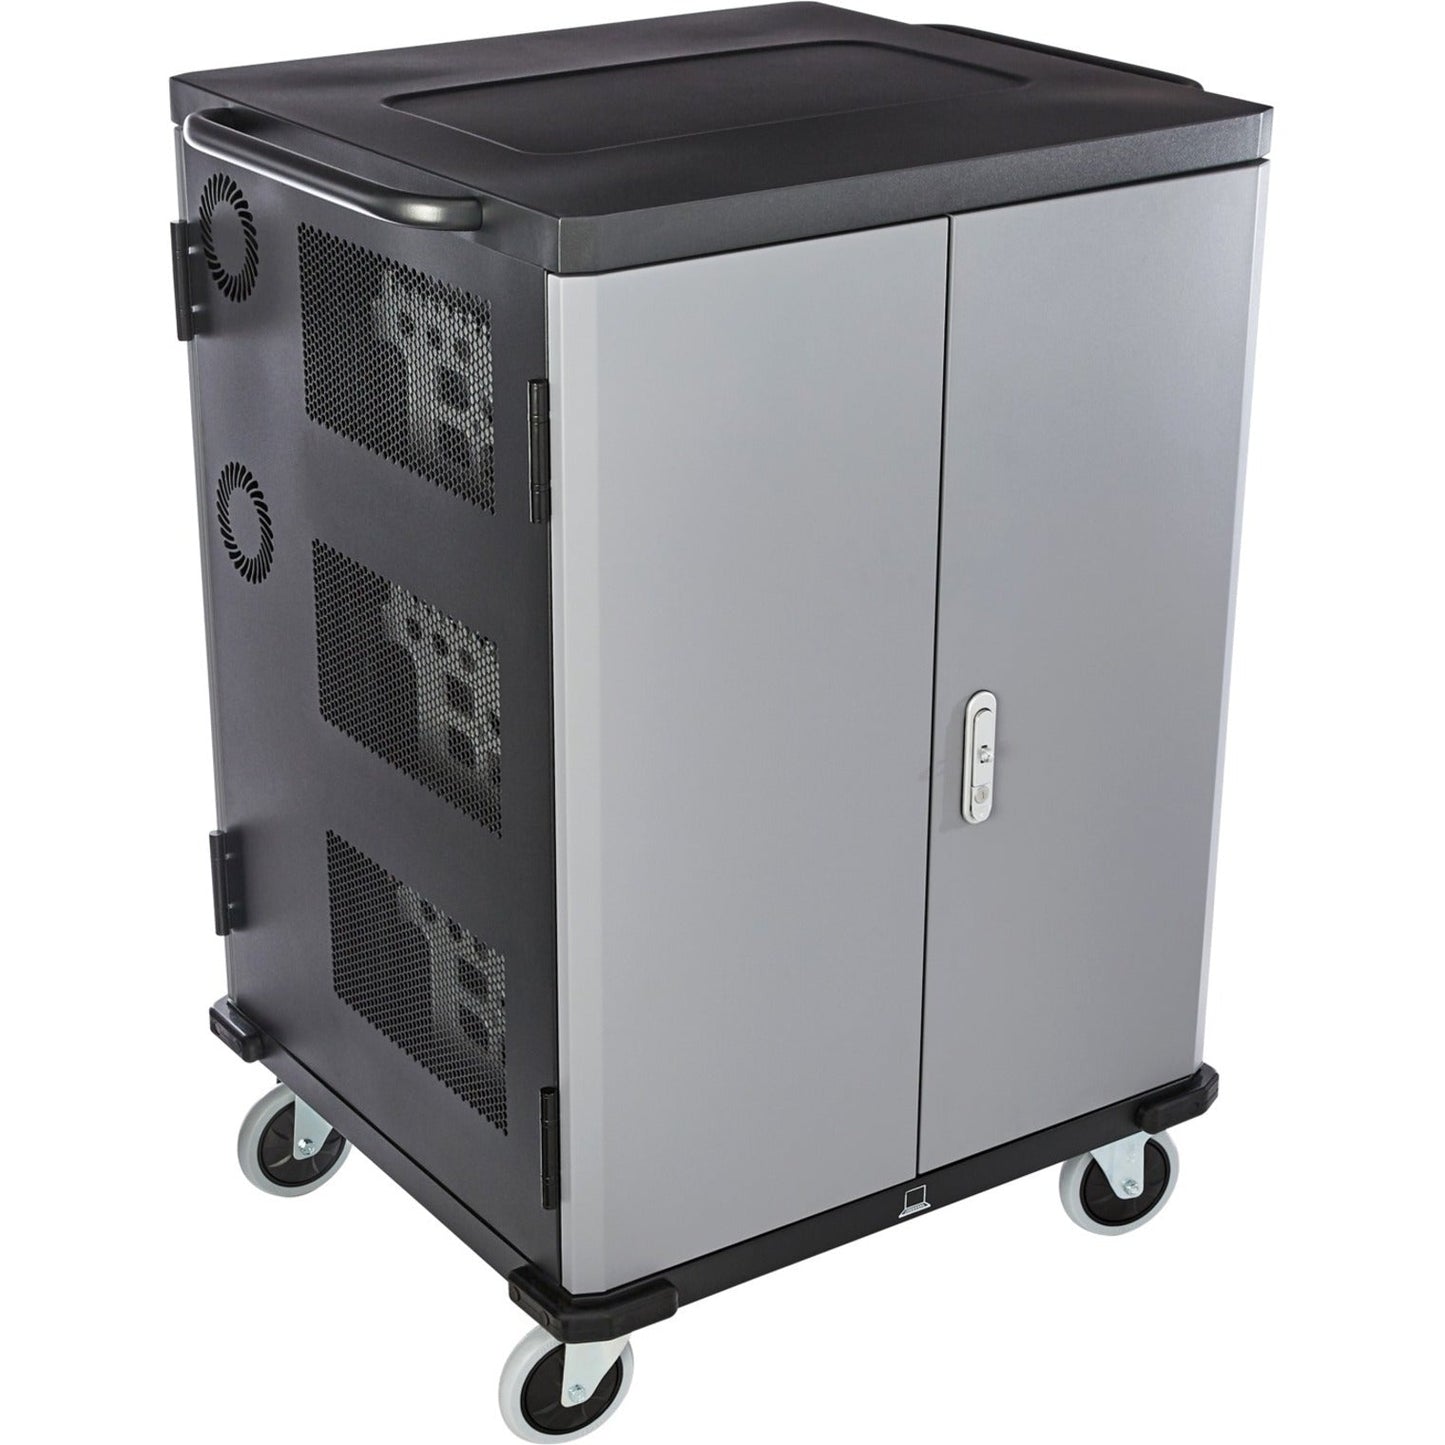 V7 Charge Cart for 36 Mobile Computers - Secure Store and Charge Chromebooks Notebooks and Tablets - NEMA US Plug